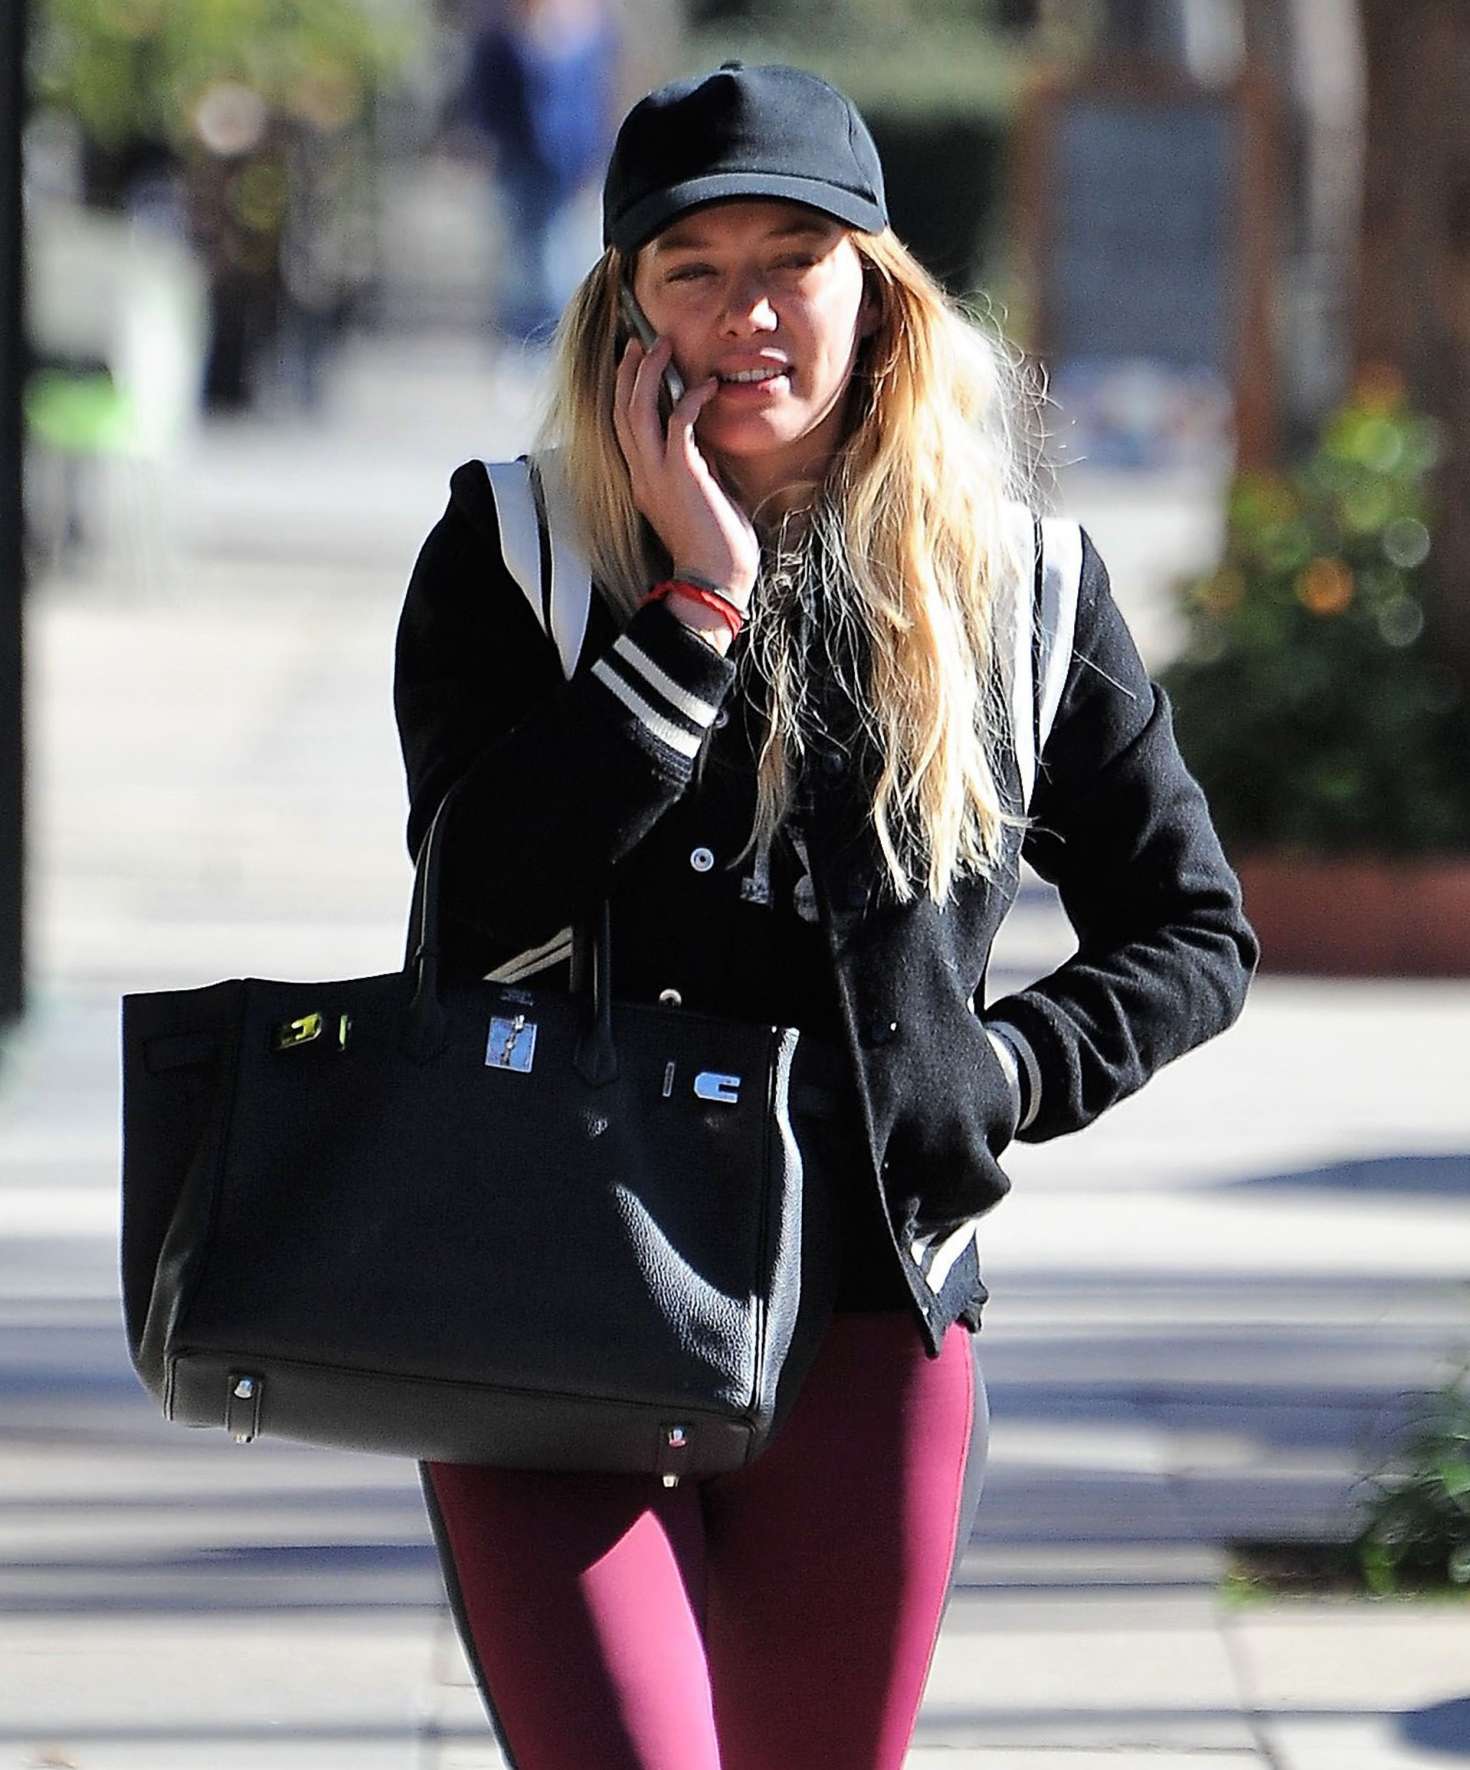 Hilary Duff 2017 : Hilary Duff in Spandex Arriving to the Gym -23. 